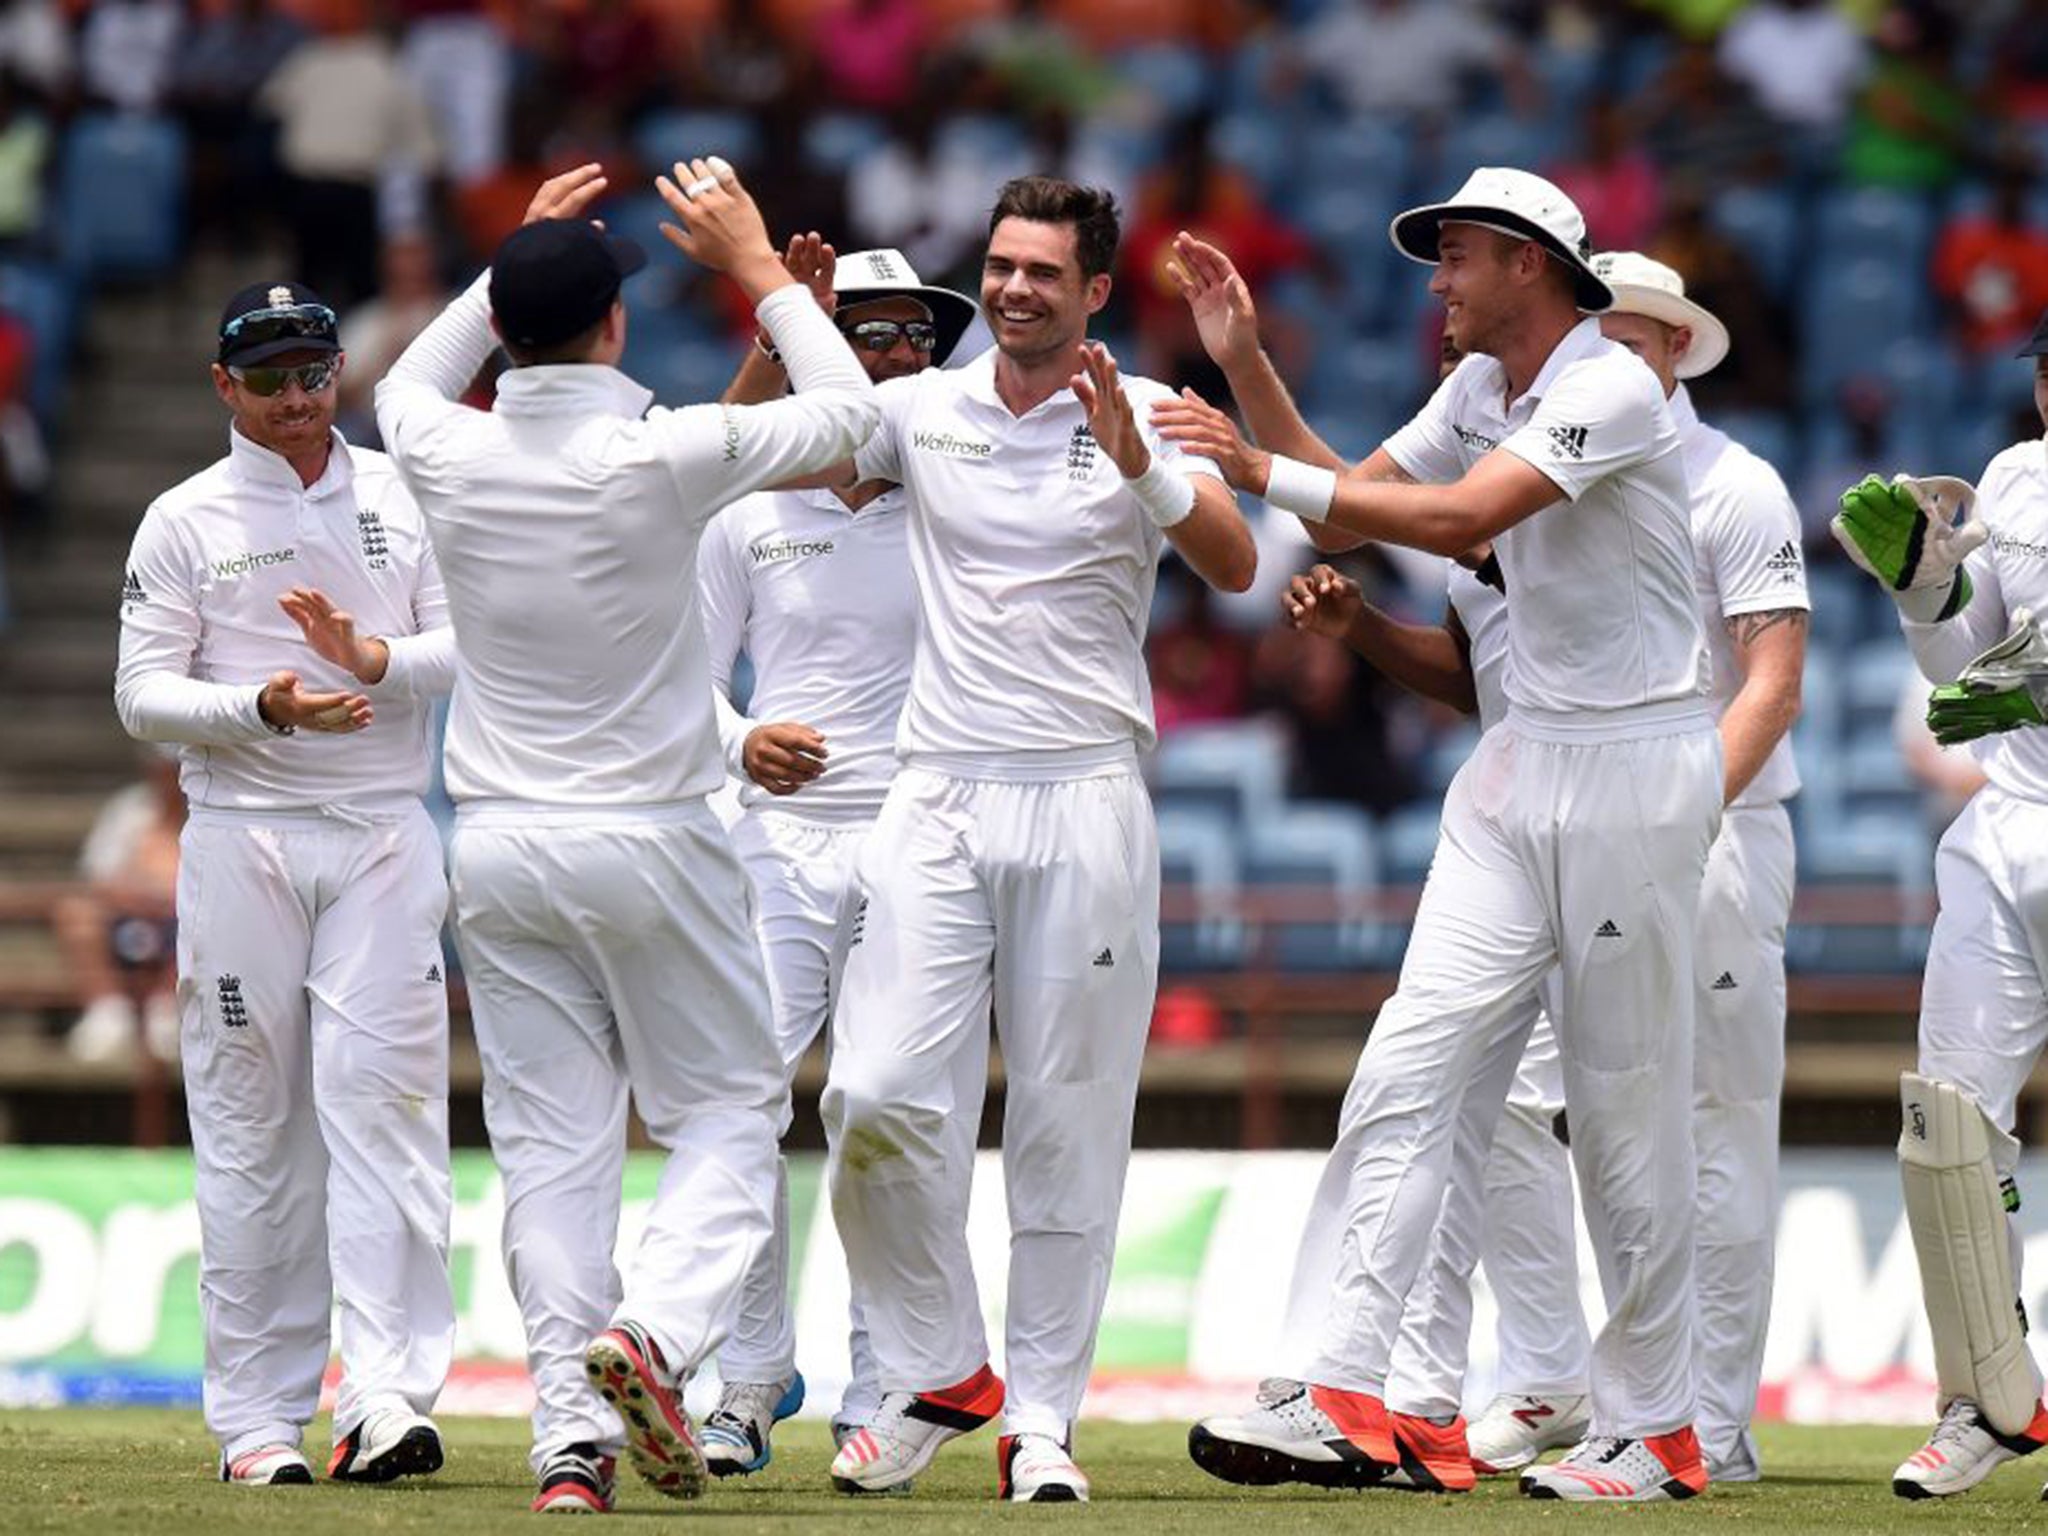 Jimmy Anderson celebrates one of his four wickets with his England team-mates in Grenada on Saturday night